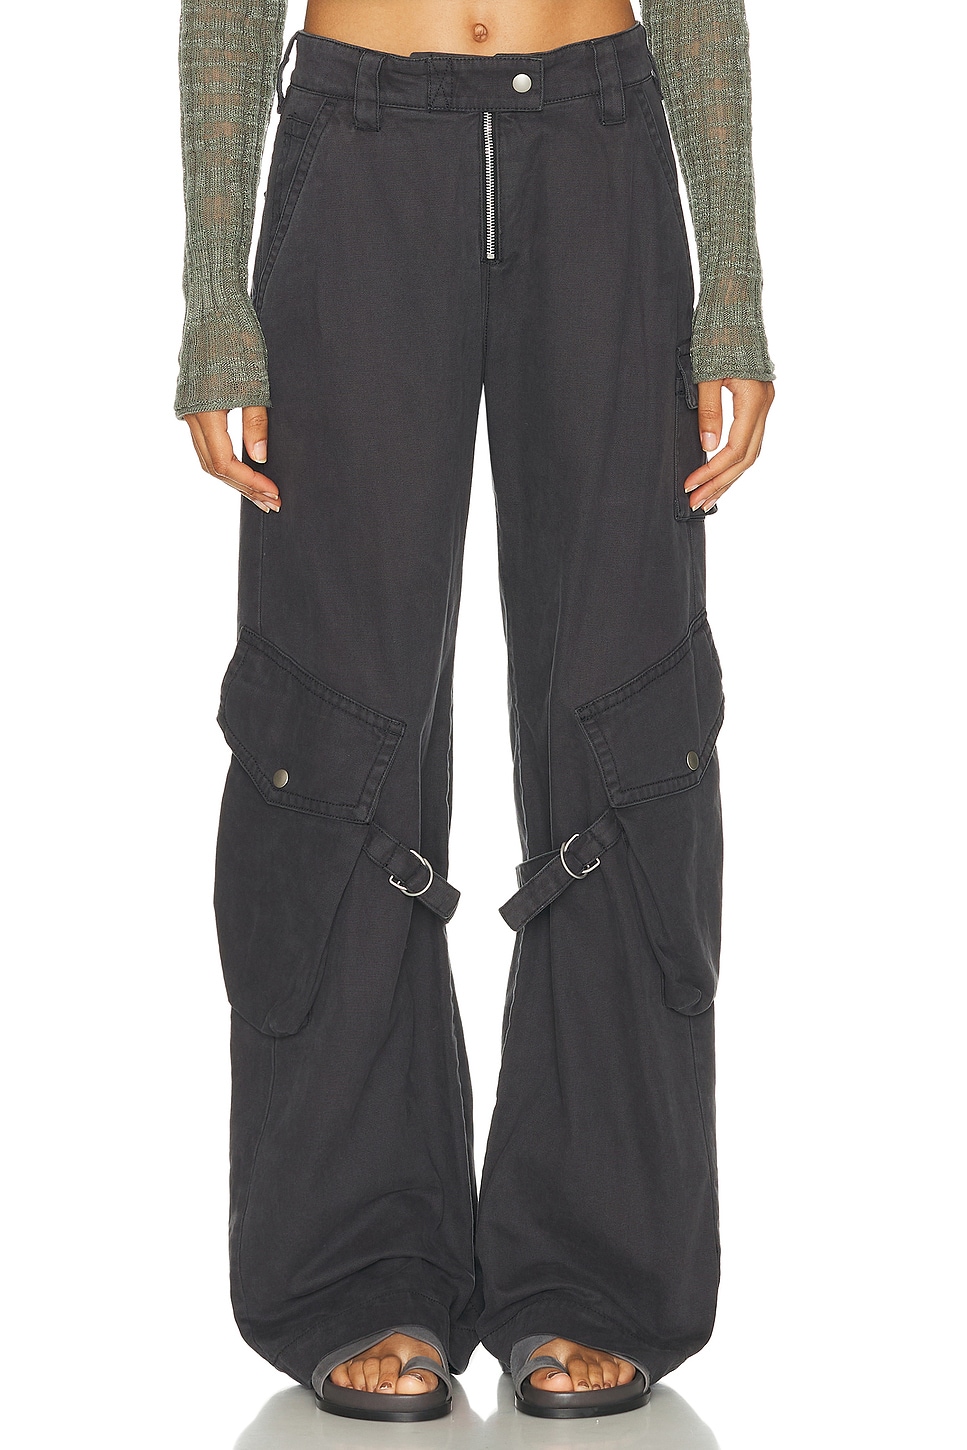 Image 1 of Acne Studios Casual Trouser in Charcoal Grey